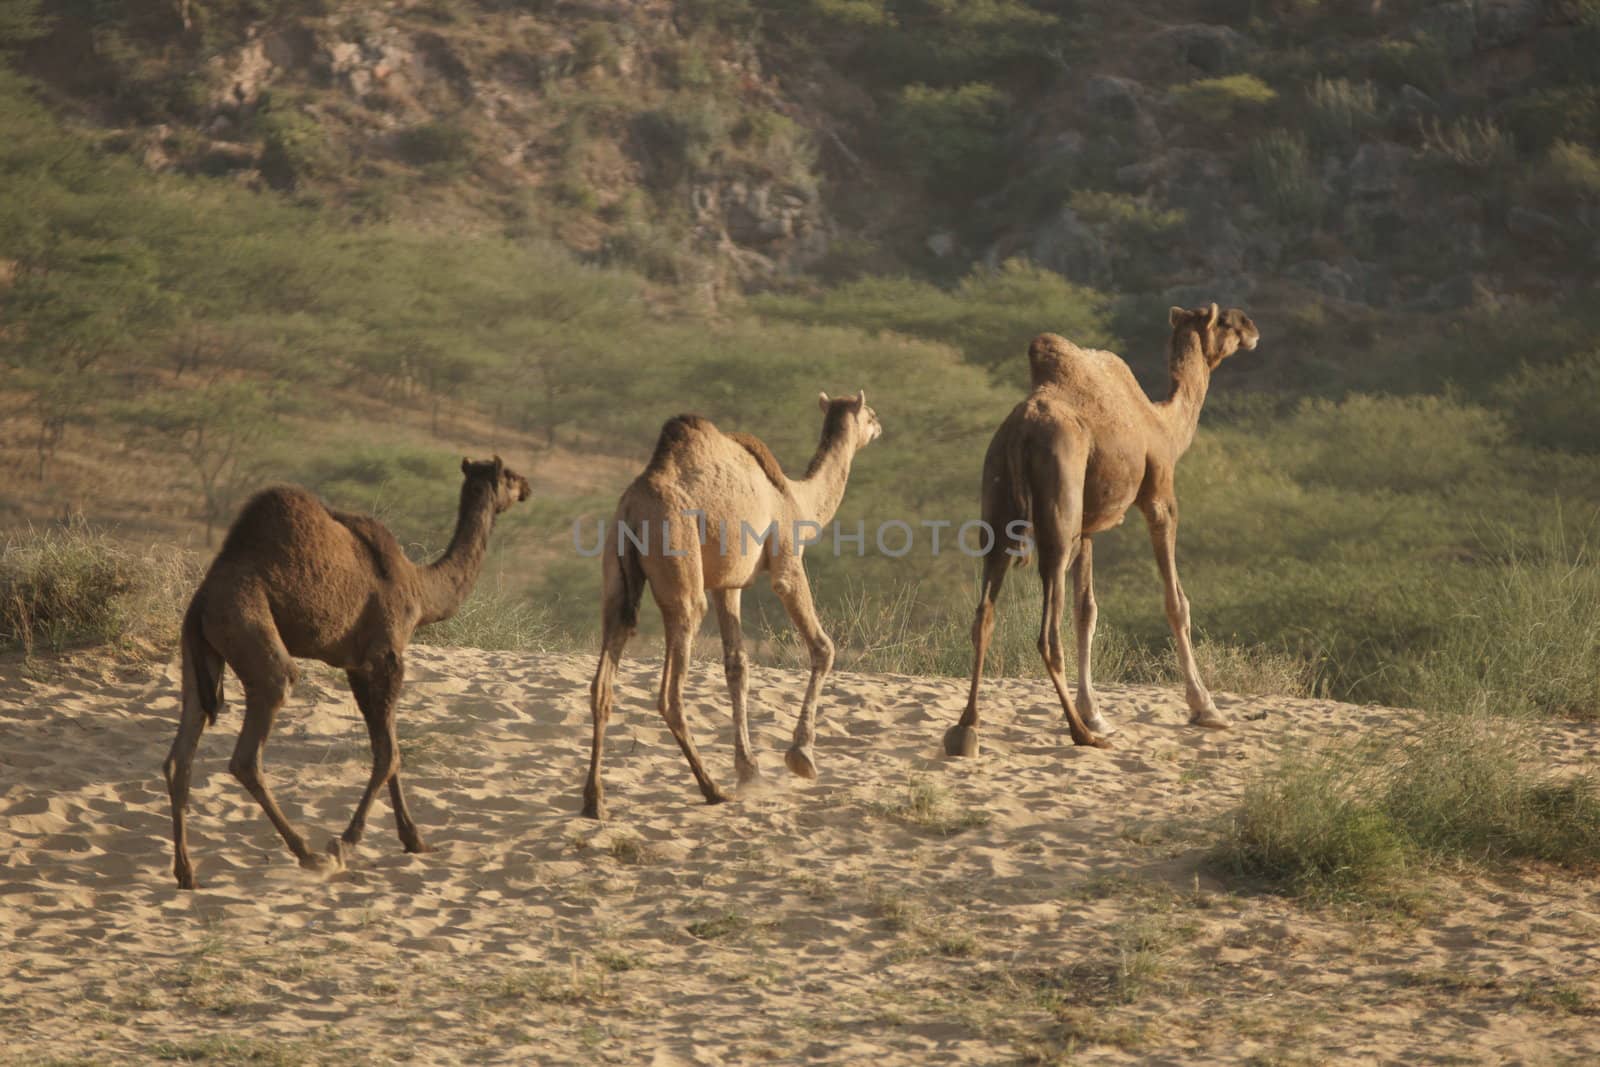 Group of camels crossing sandy desert at the Pushkar Fair in Rajasthan, India